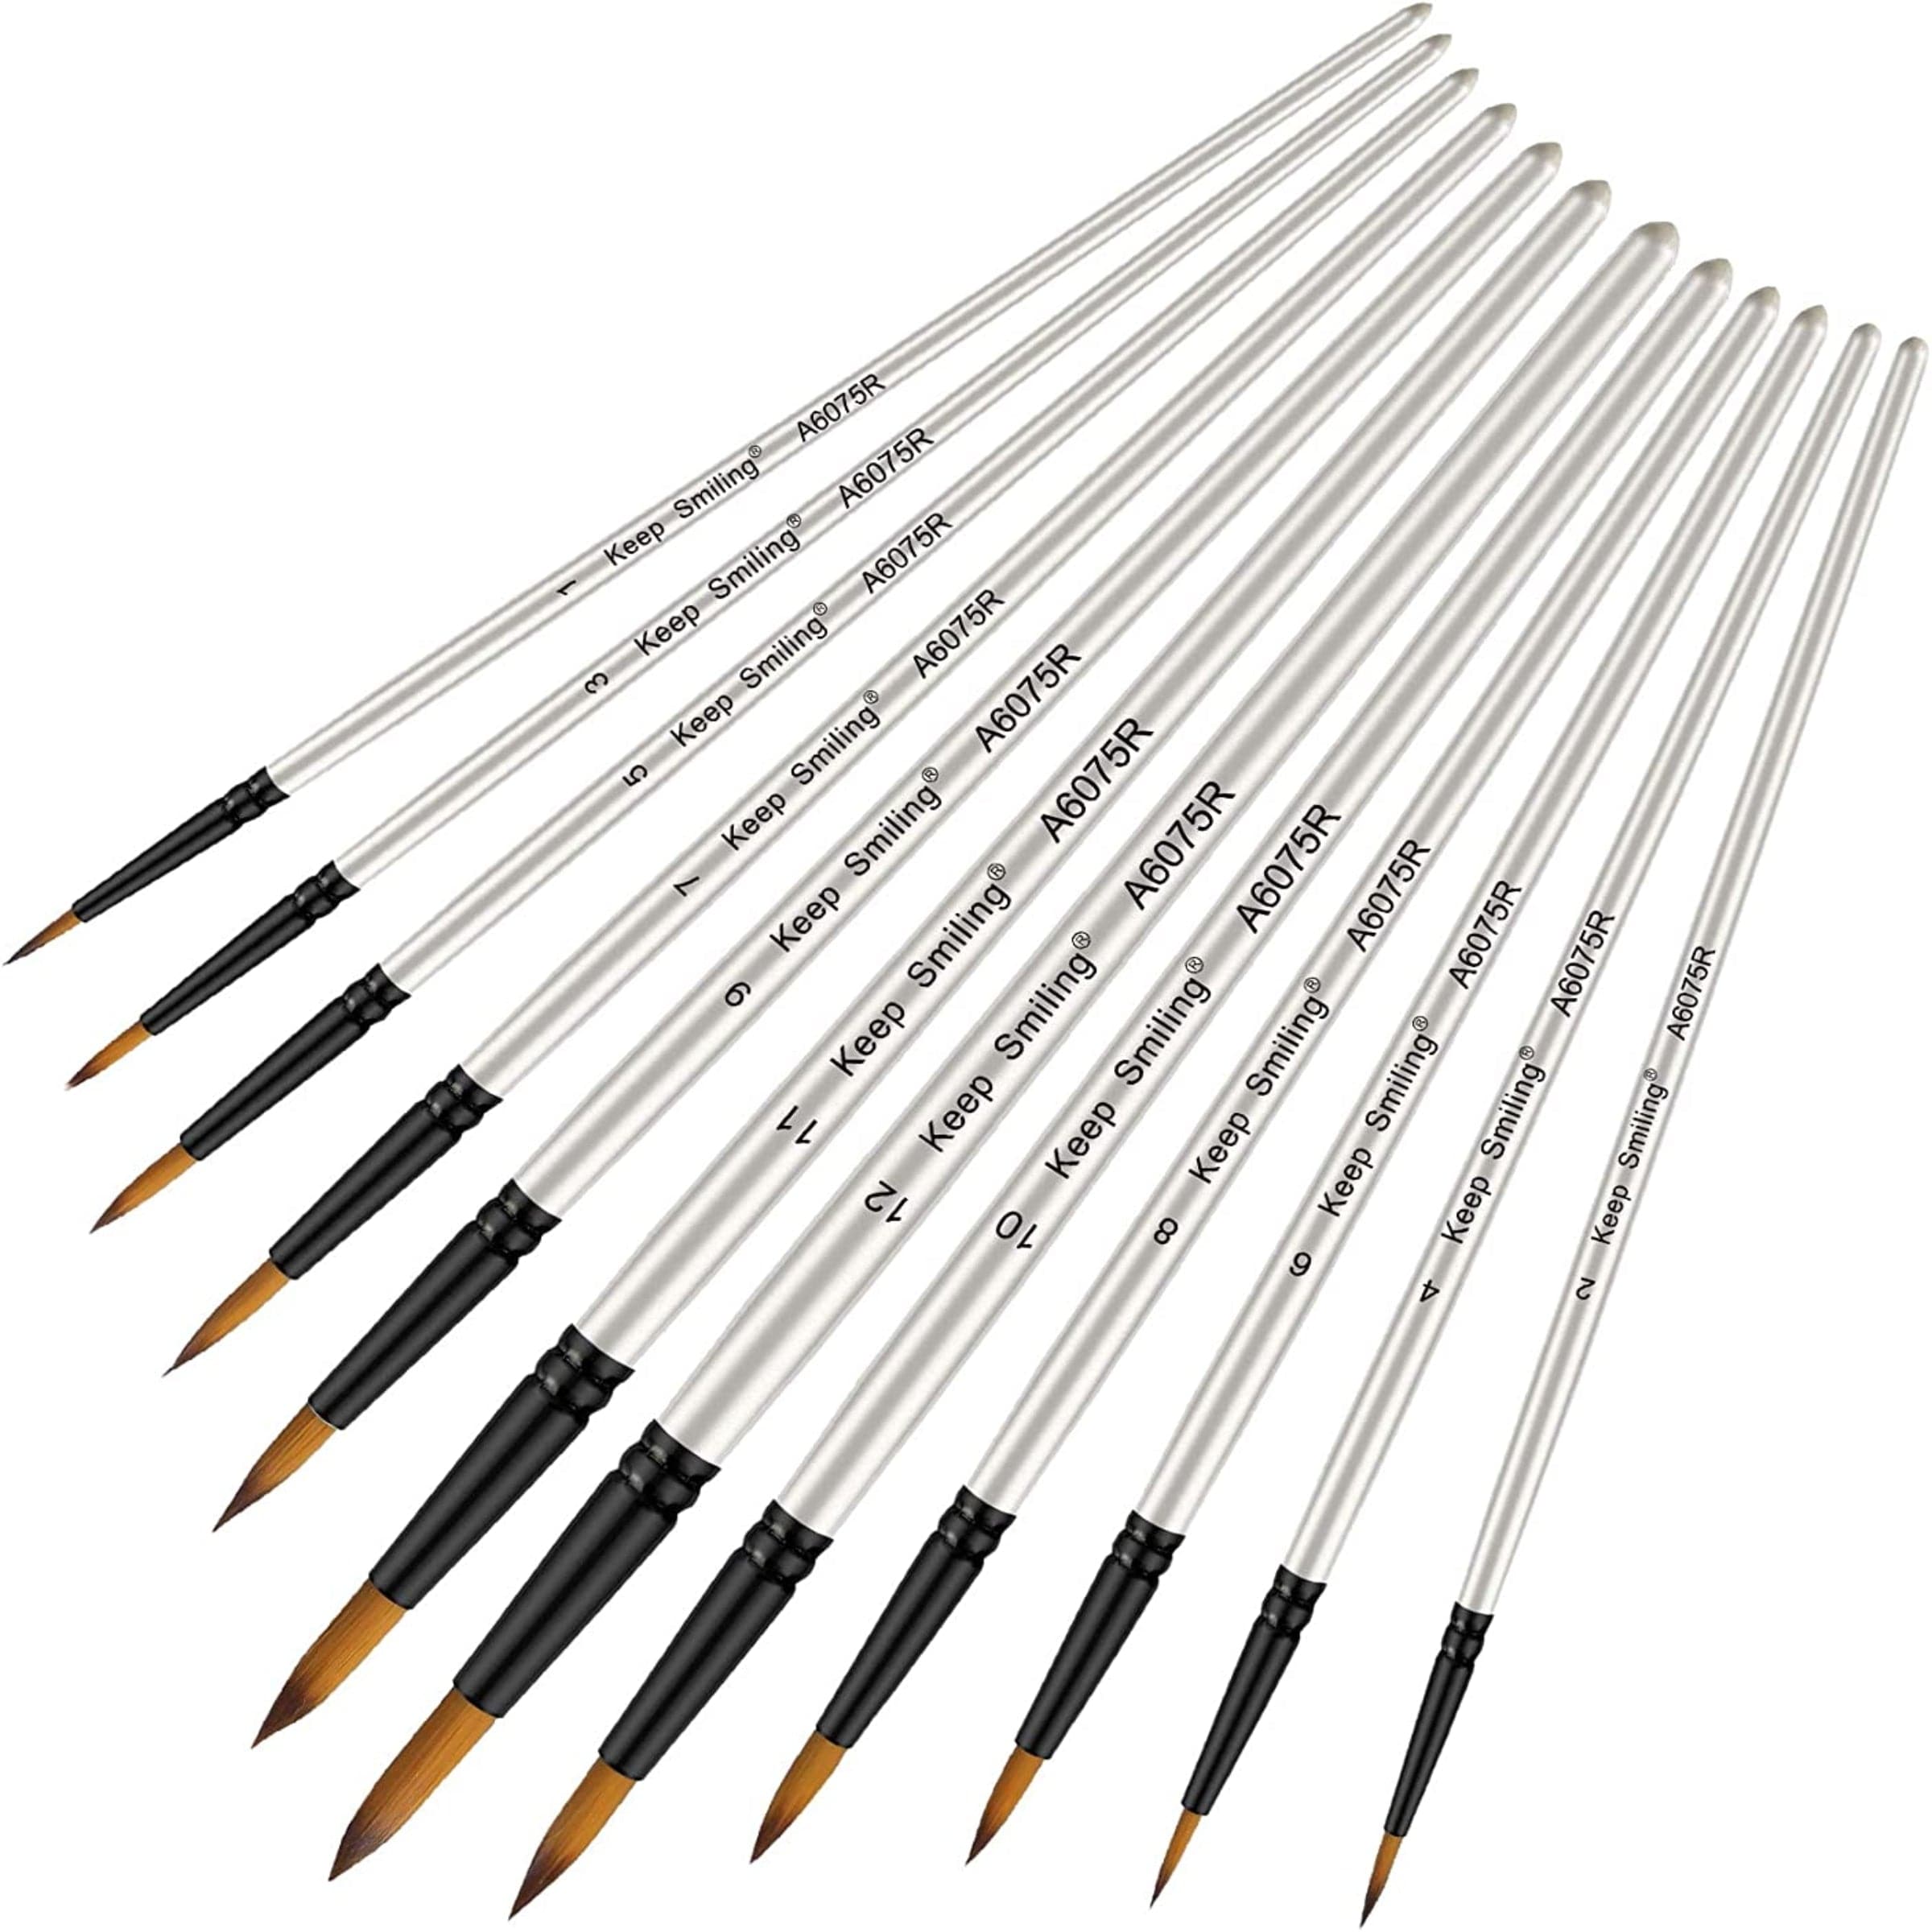 Keep Smiling Professional Round Tip Paint Brush Pack of 12